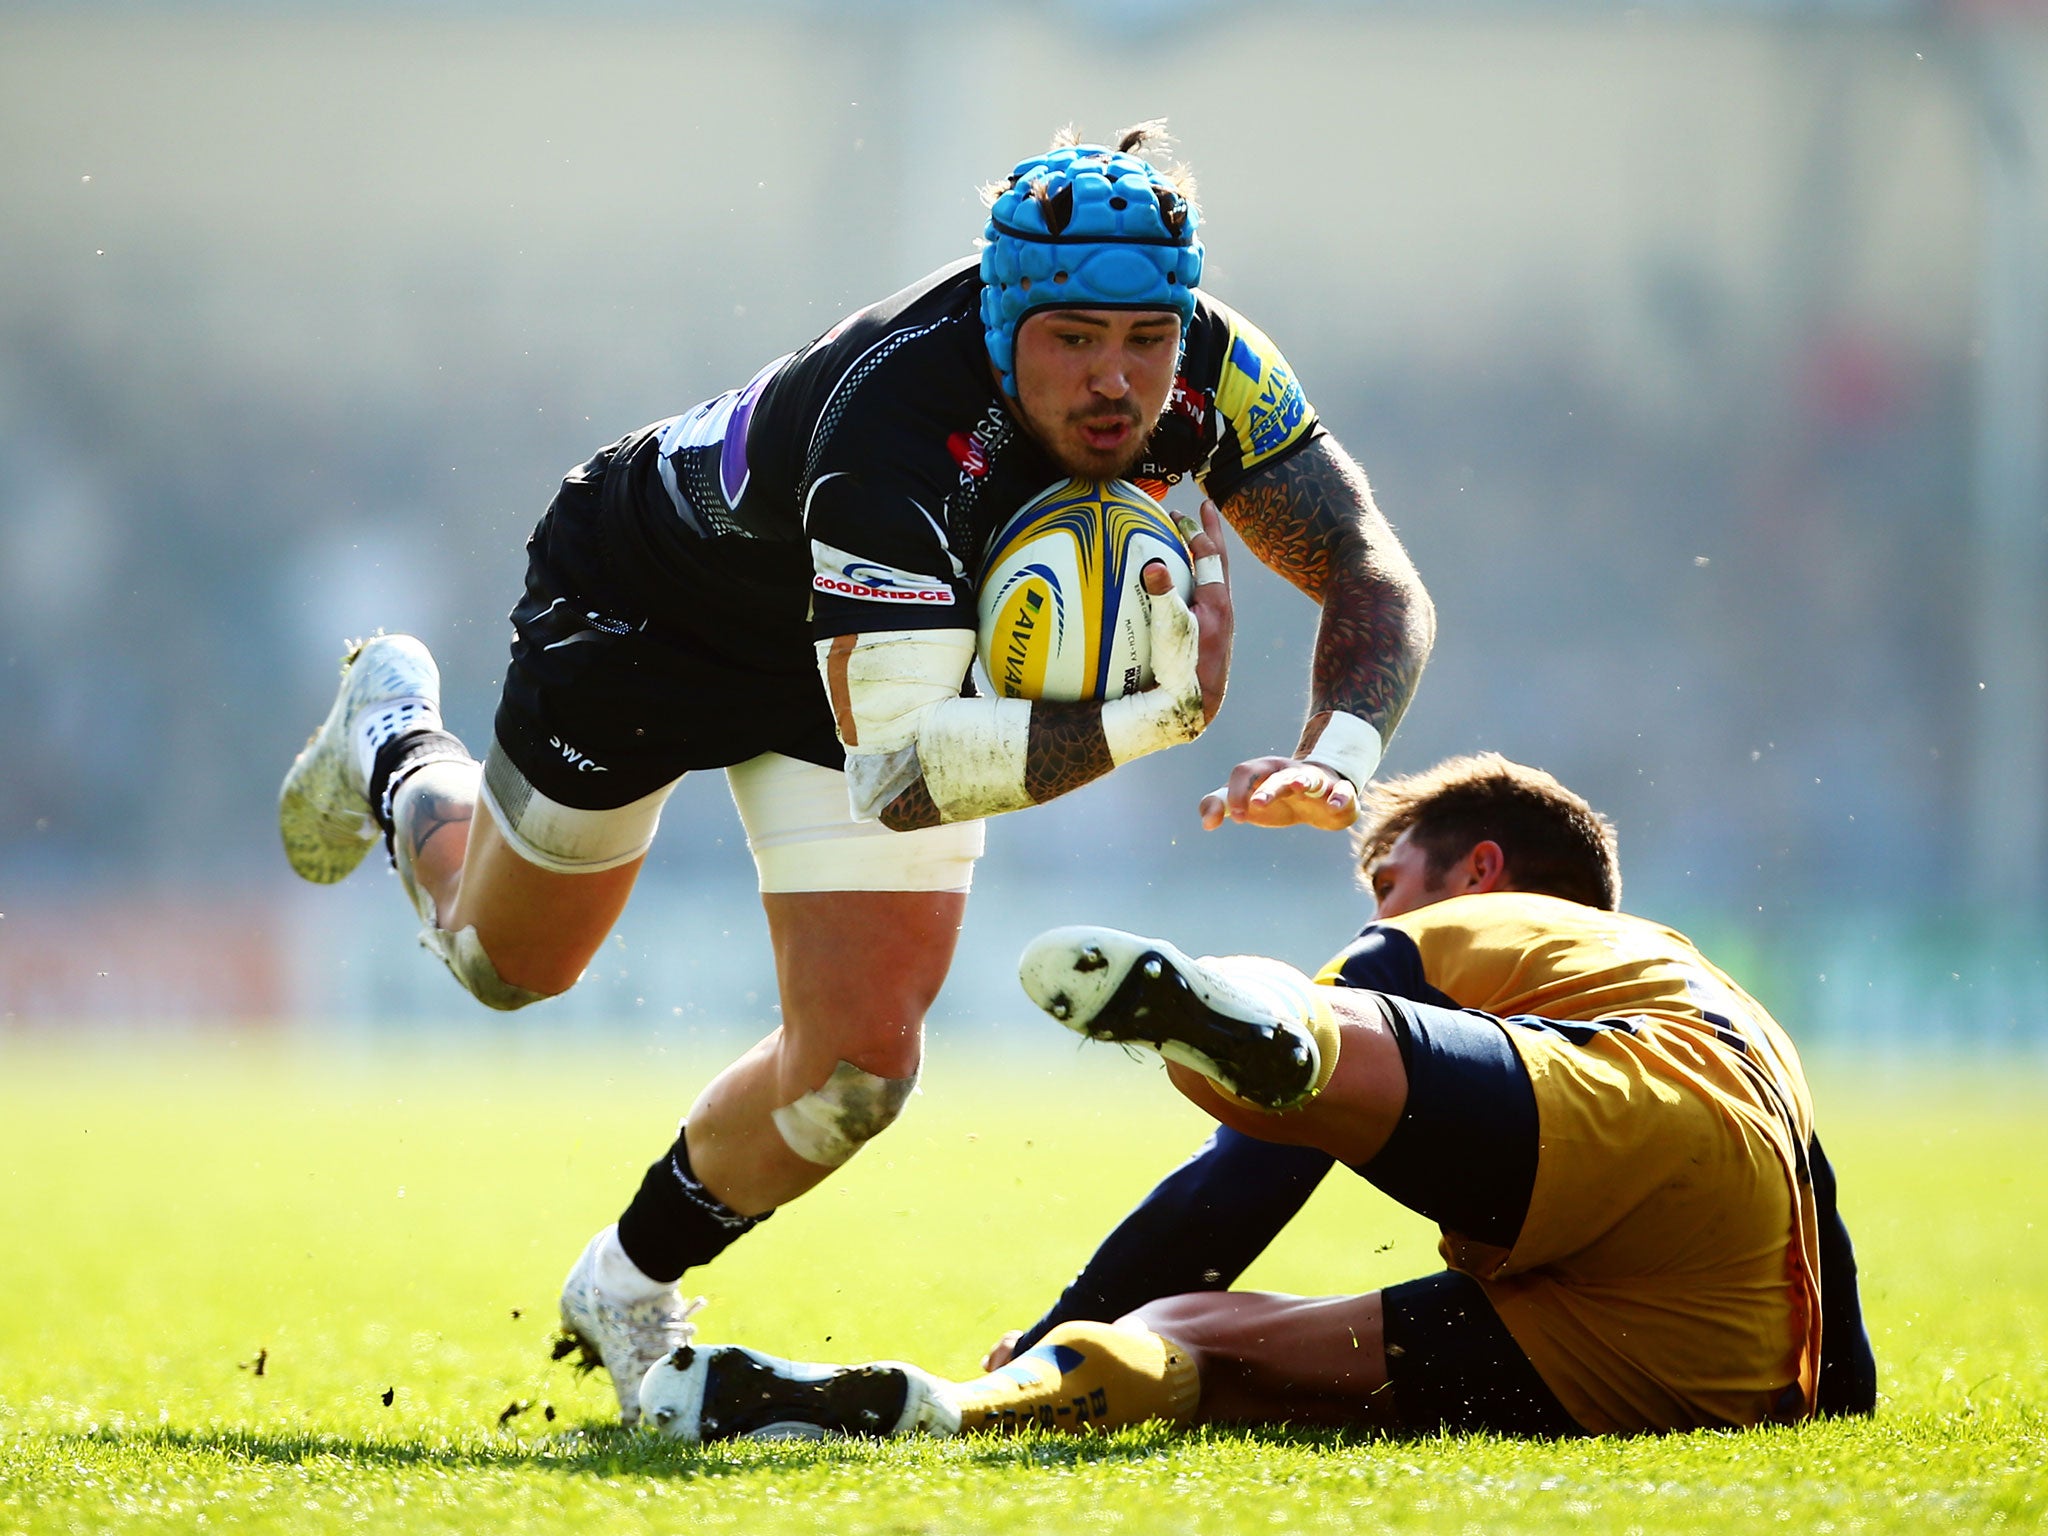 Exeter Chiefs will hope to avenge their defeat by Saracens in last year's Premiership final